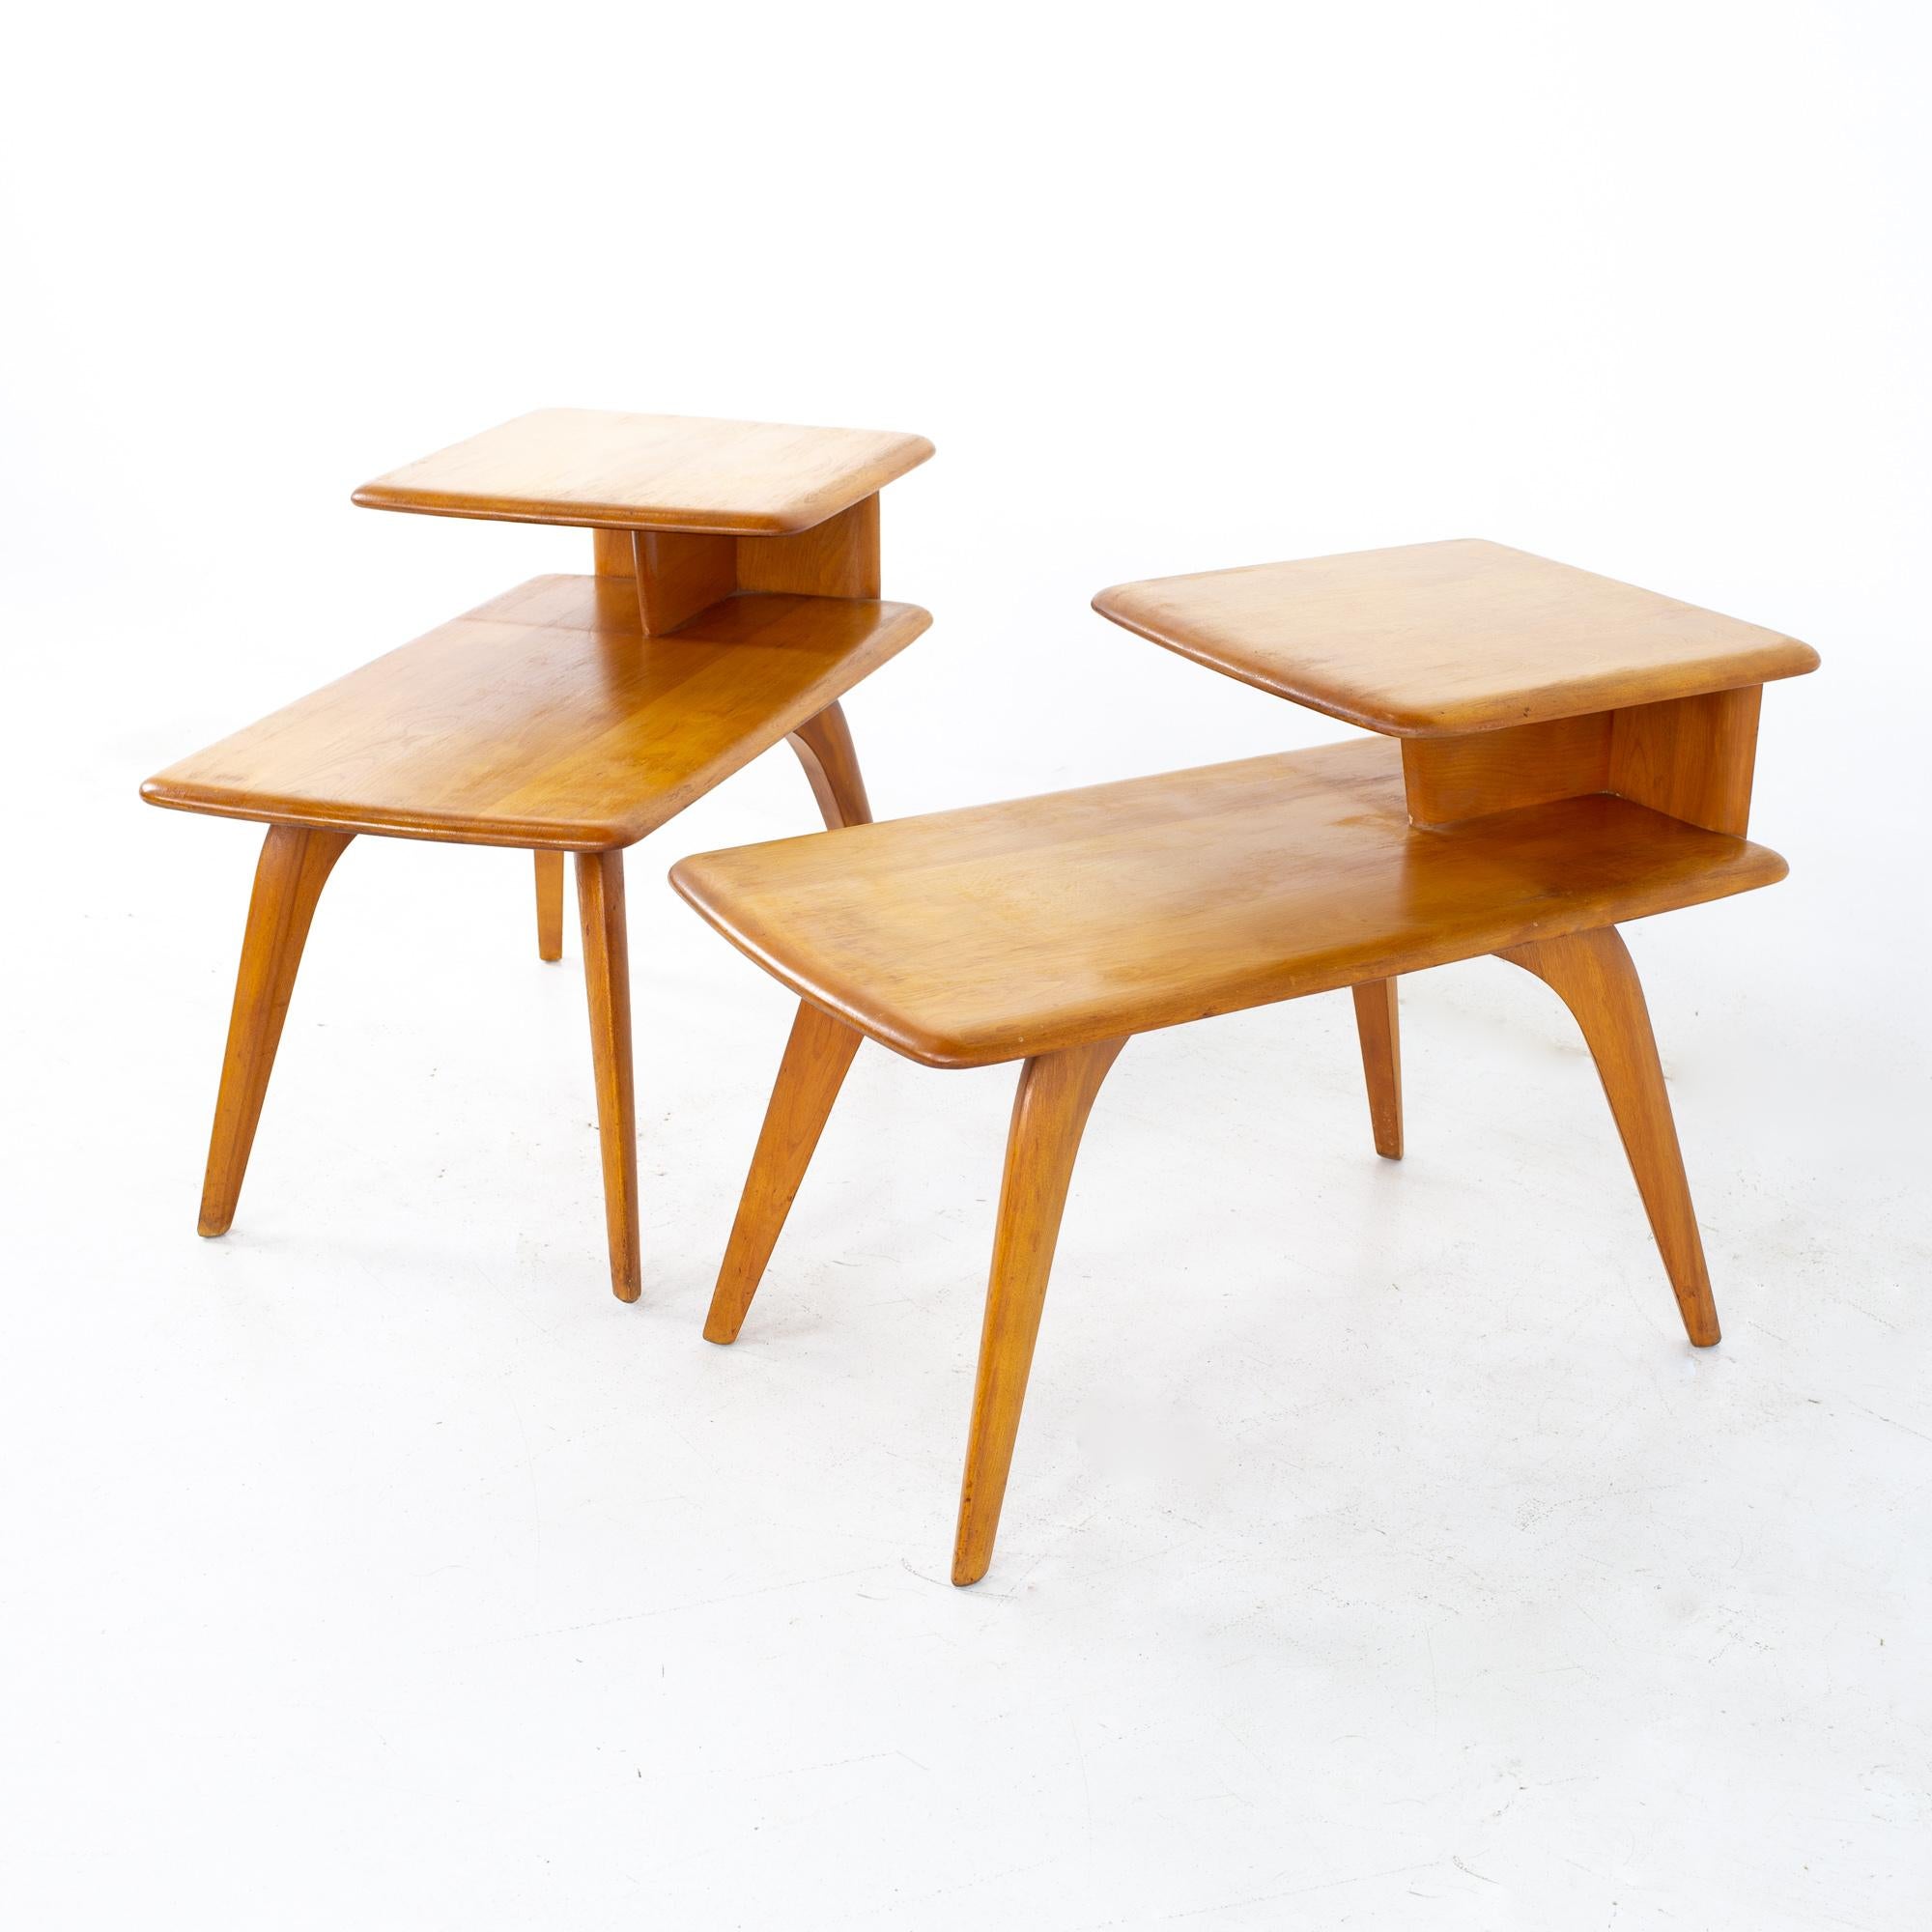 Heywood Wakefield Mid Century step side tables, a pair
Each table measures: 29.5 wide x 17 deep x 22 inches high

All pieces of furniture can be had in what we call restored vintage condition. That means the piece is restored upon purchase so